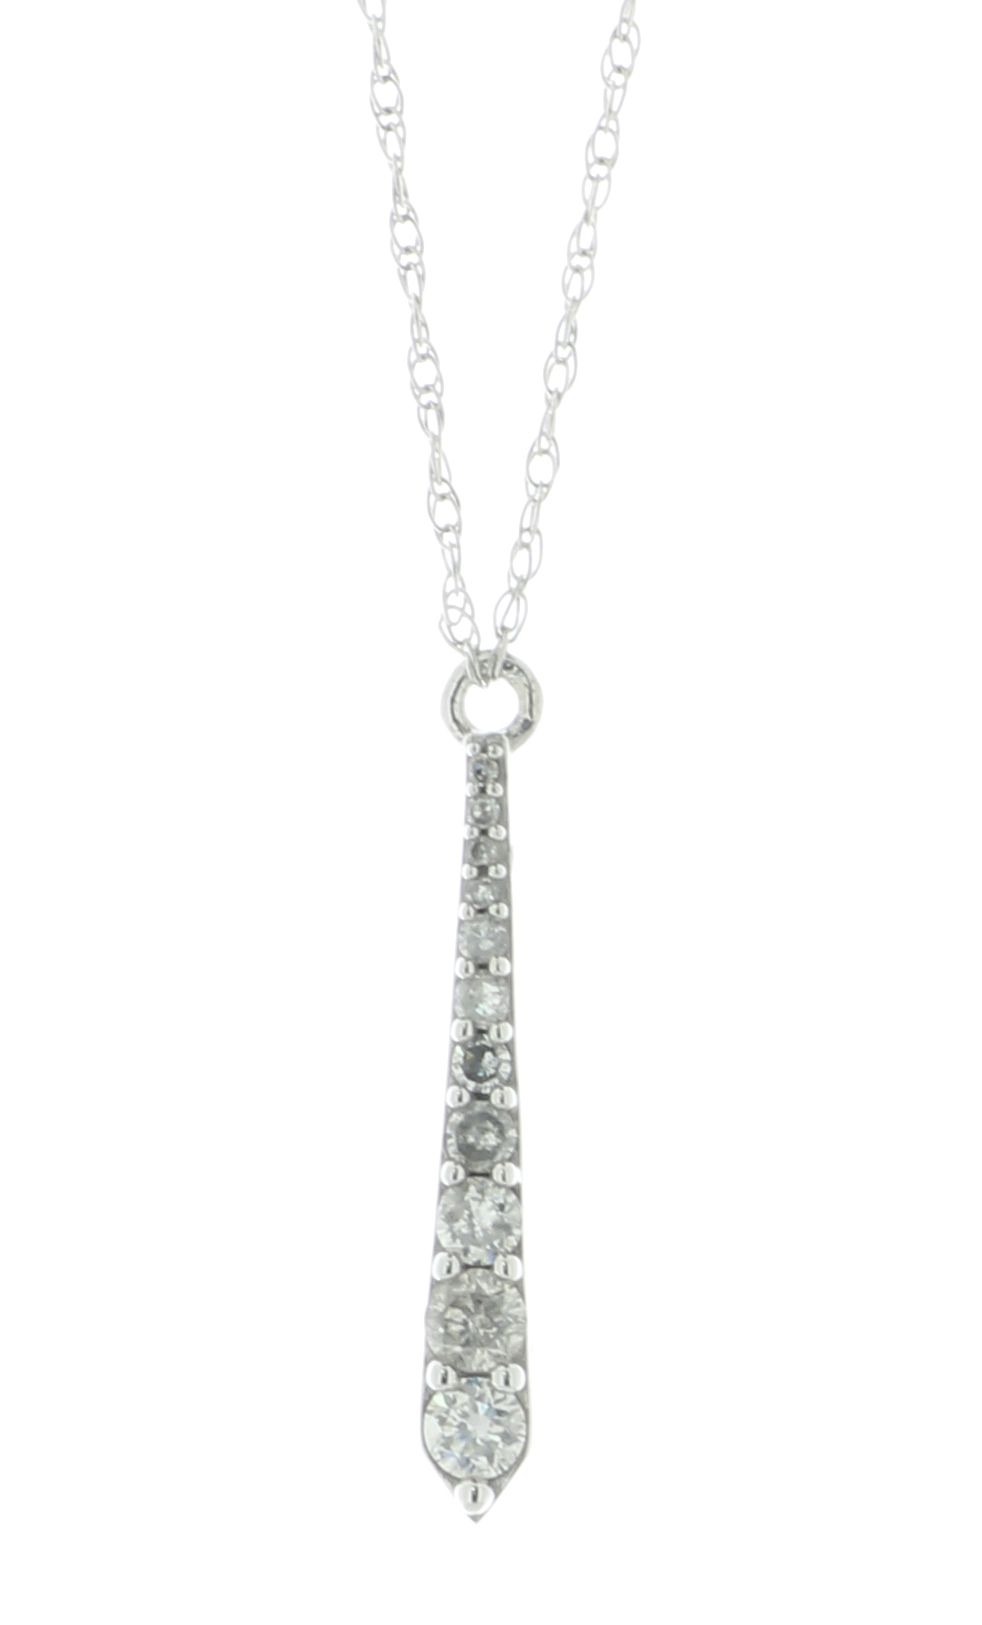 9ct White Gold Diamond Bar Pendant and 18"" Chain 0.16 Carats - Image 3 of 4